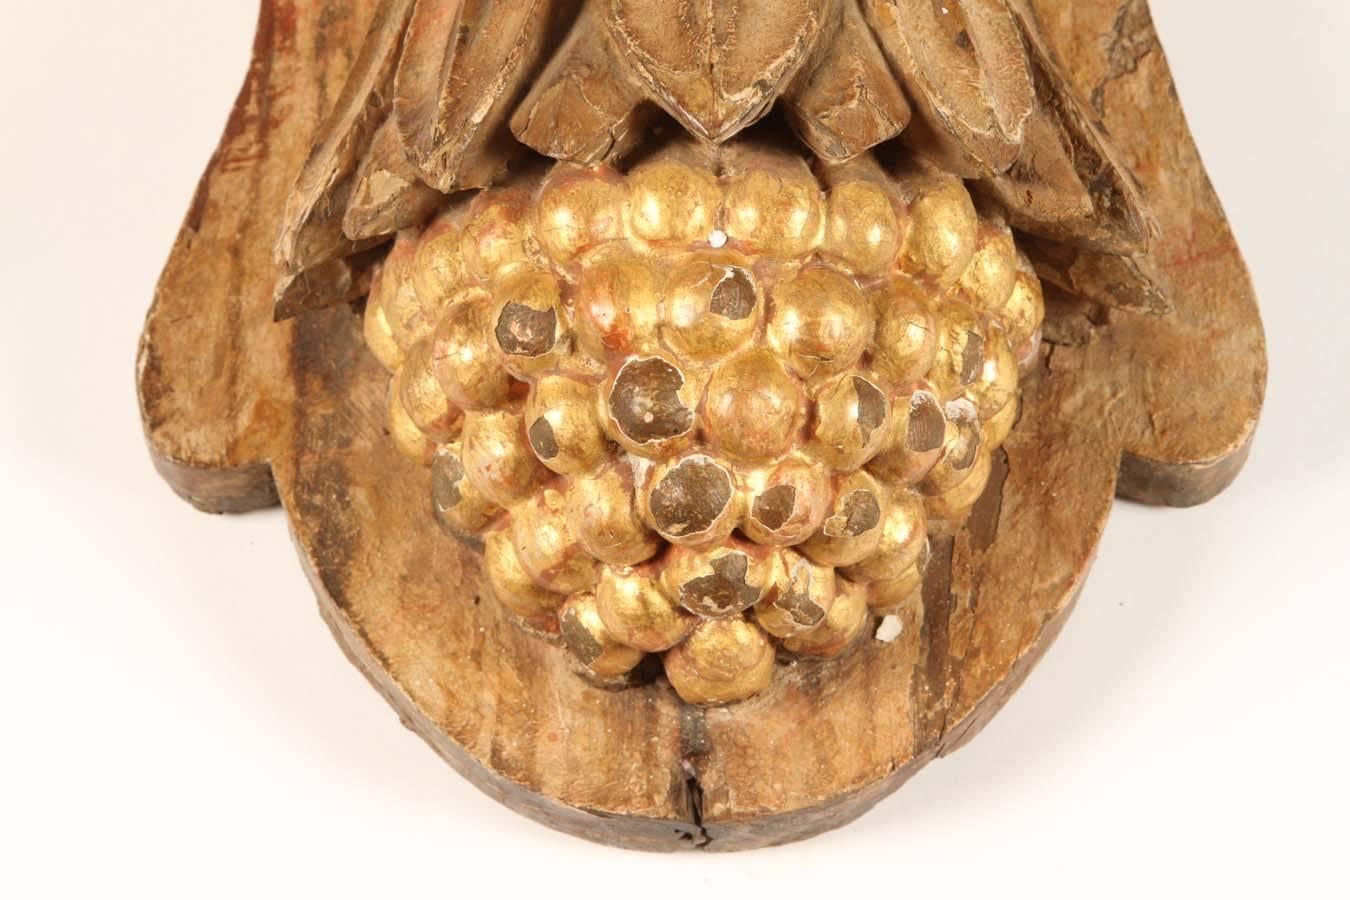 Hand-carved giltwood decoration in the form of a wheat sheaf, 19th century.
The wheat sheaf is a symbol of abundance, prosperity and bounty and was Coco Chanel's personal emblem which materialized frequently in her personal decor and in her